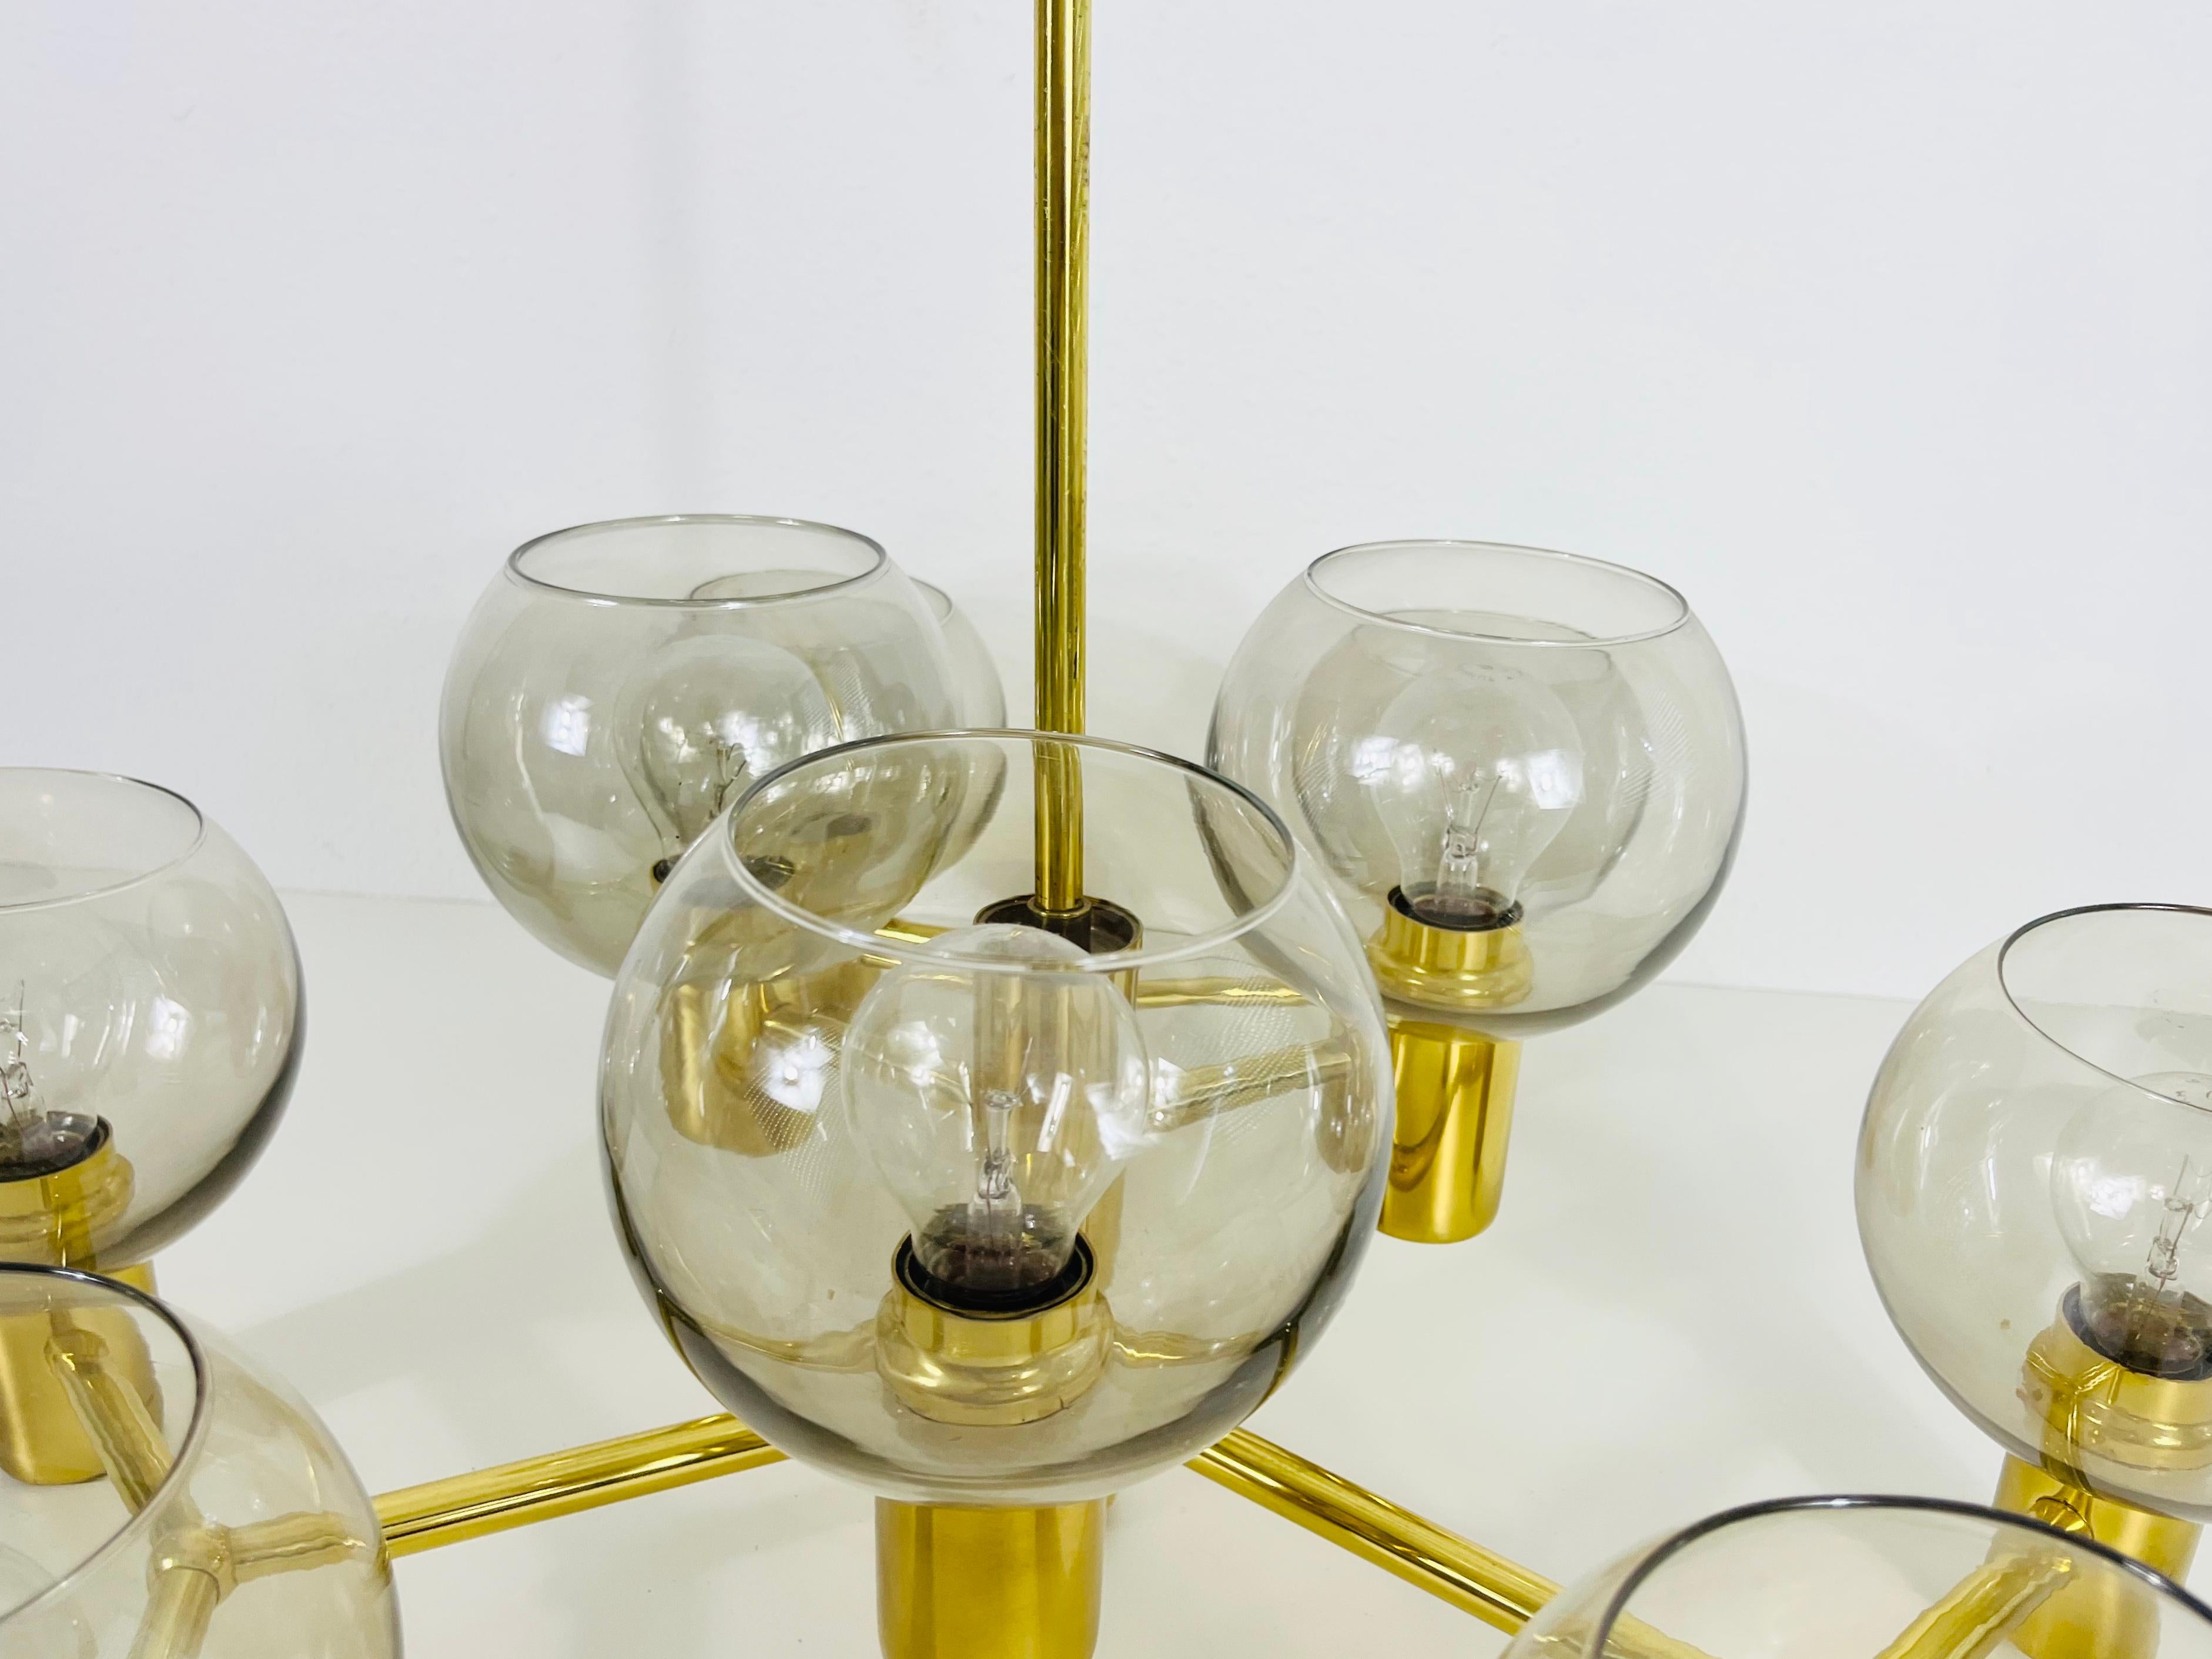 Monumental Swedish Mid-Century Modern Brass and Glass Chandelier, 1960s For Sale 4